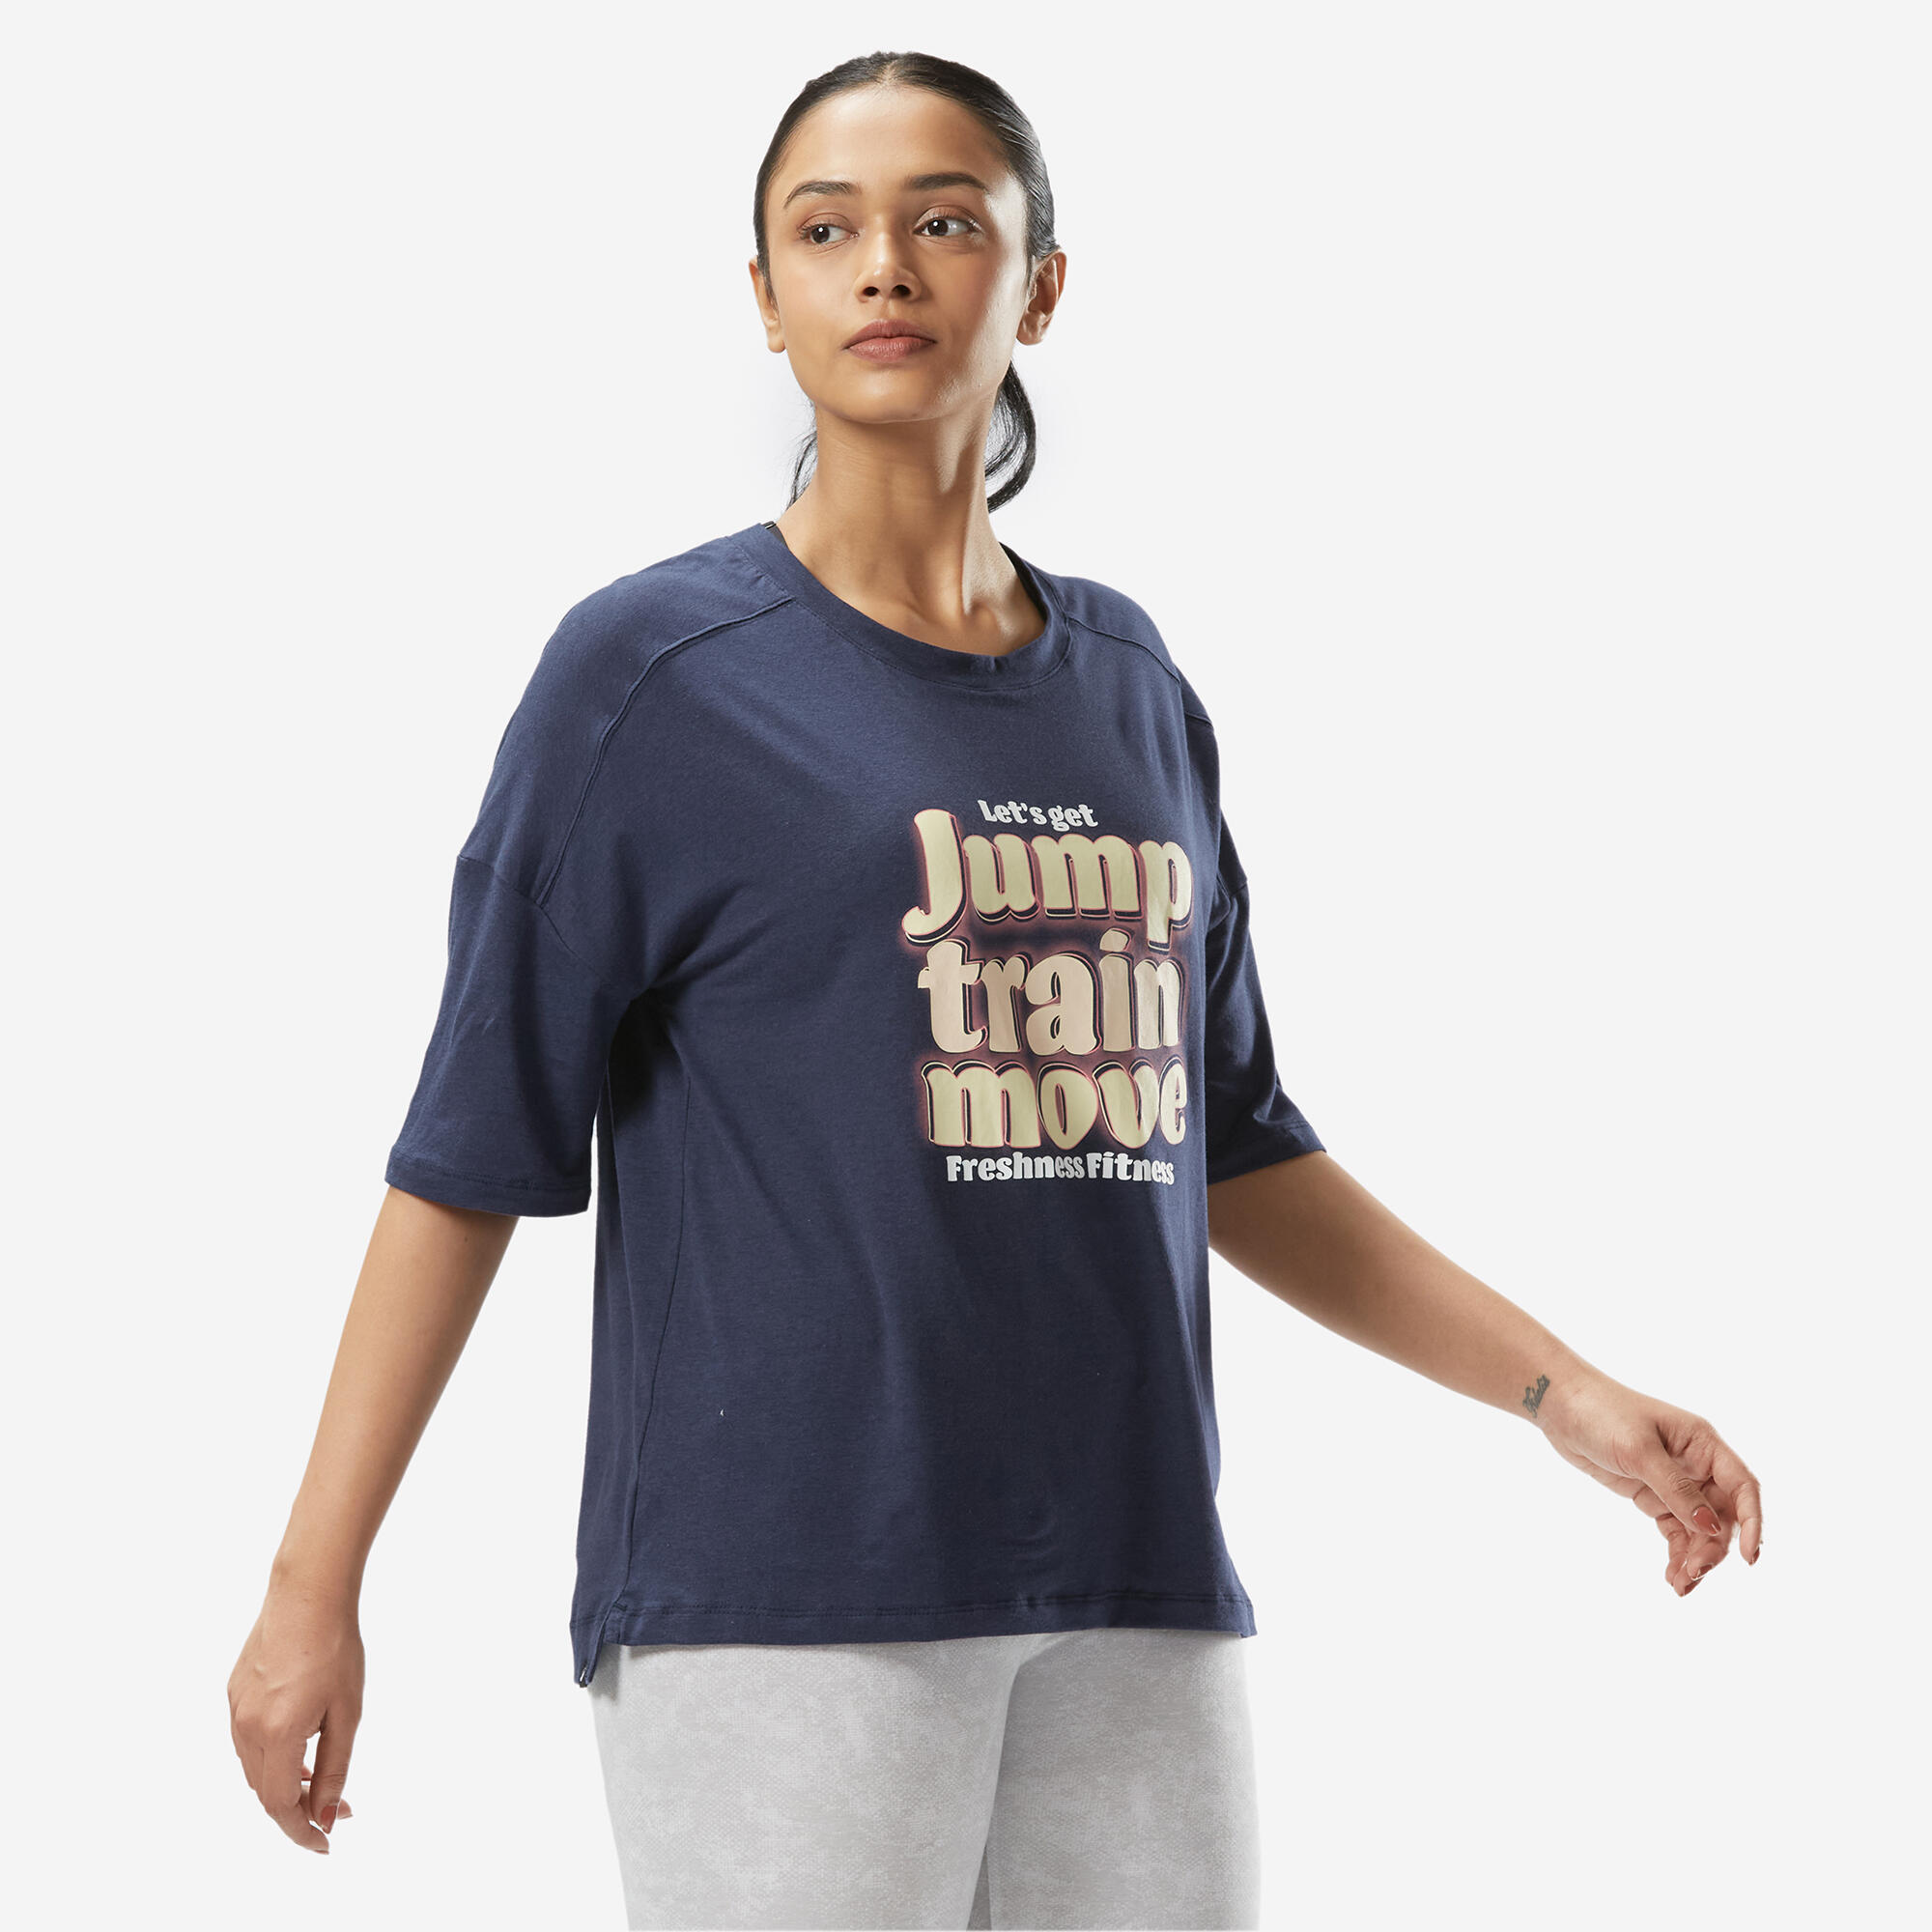 DOMYOS Women's Loose-Fit Fitness T-Shirt 520 - Navy Blue Print